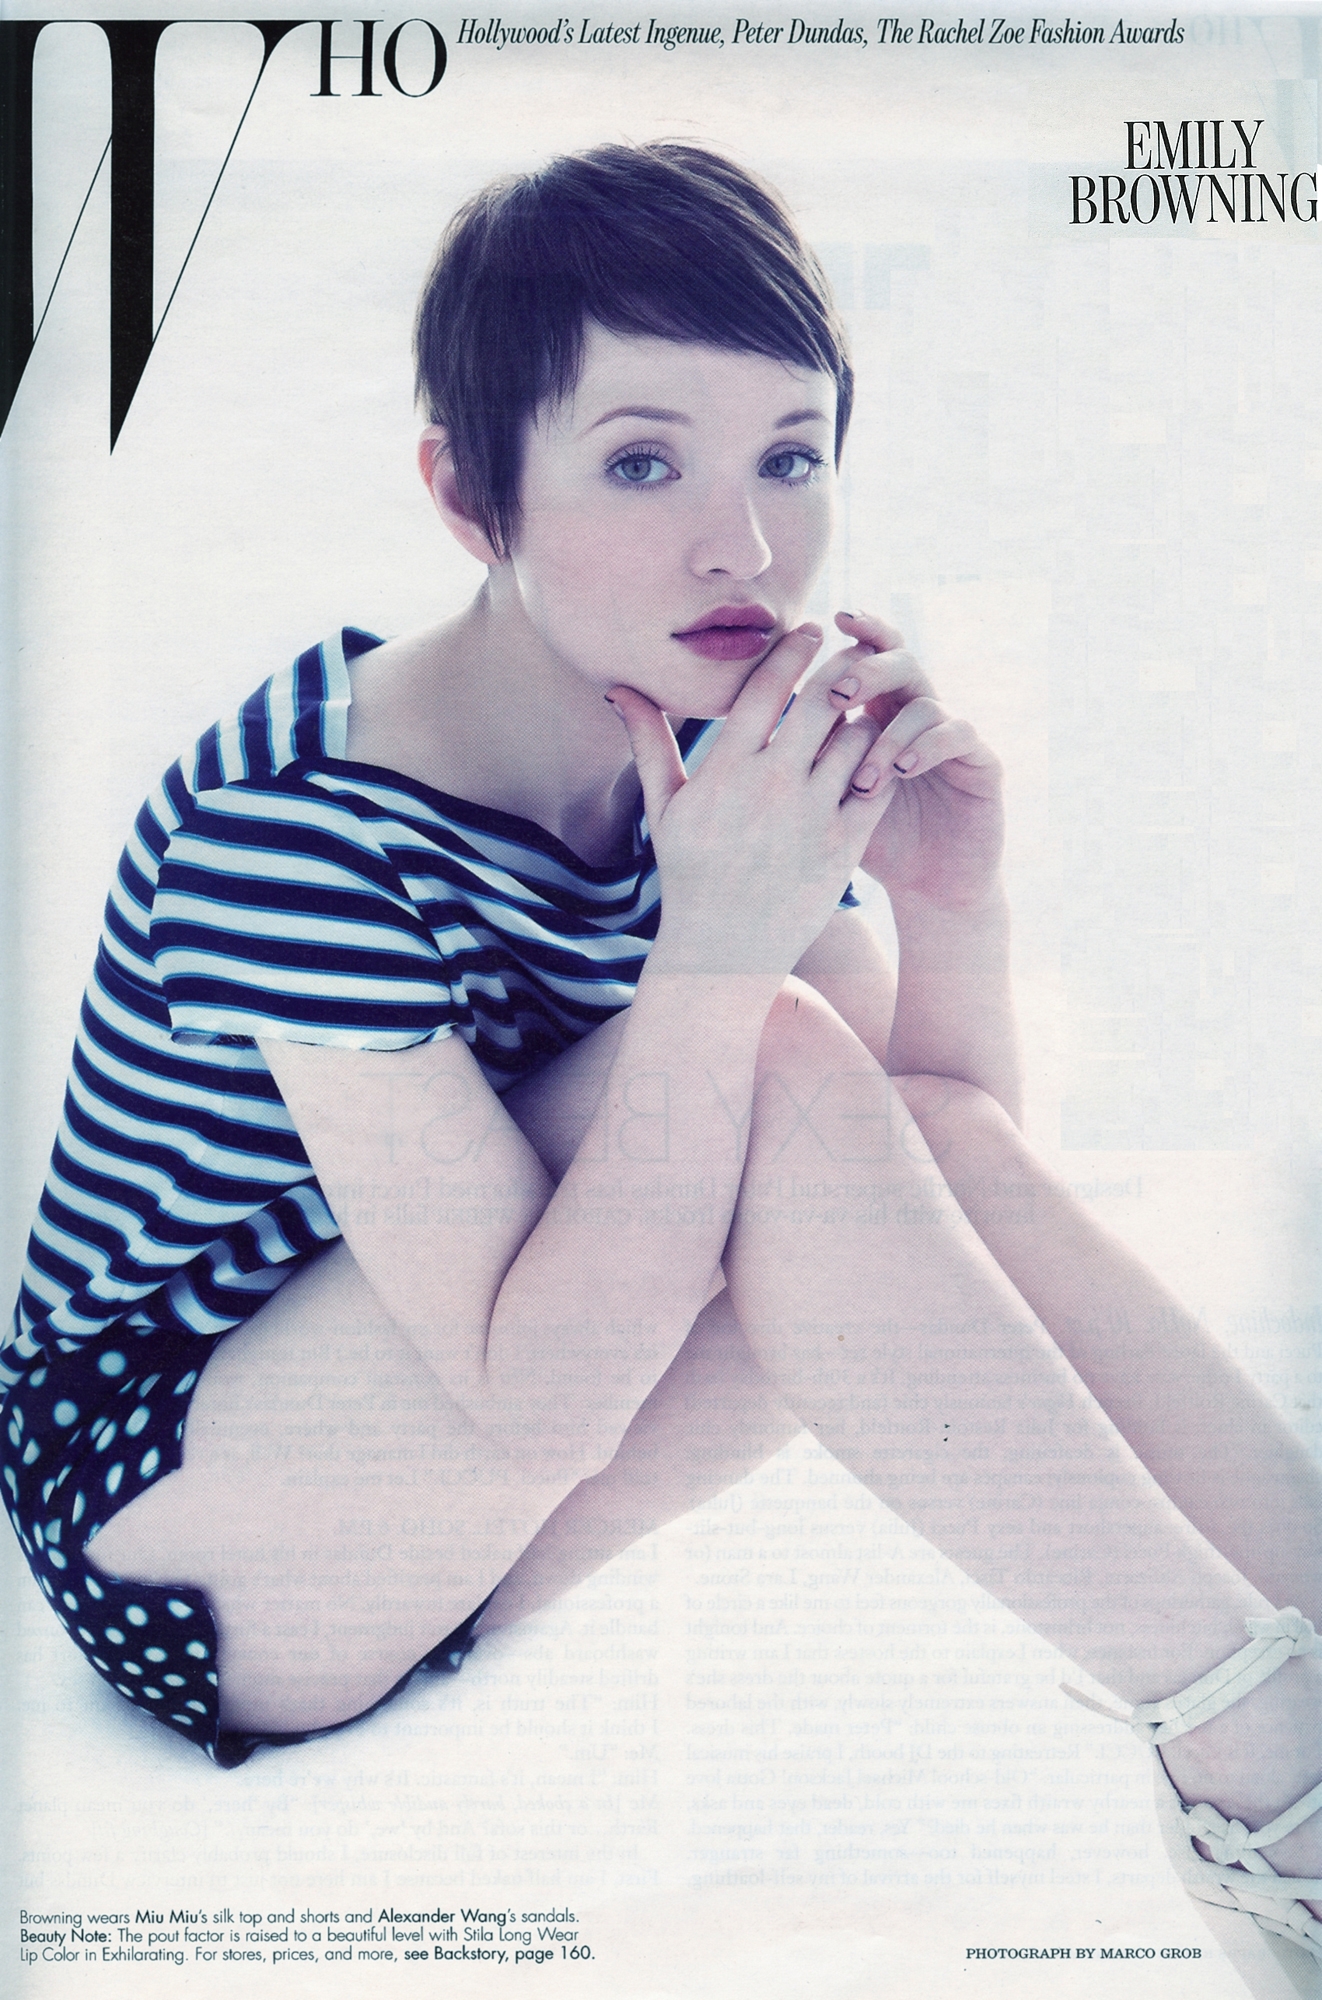 Emily Browning - Images